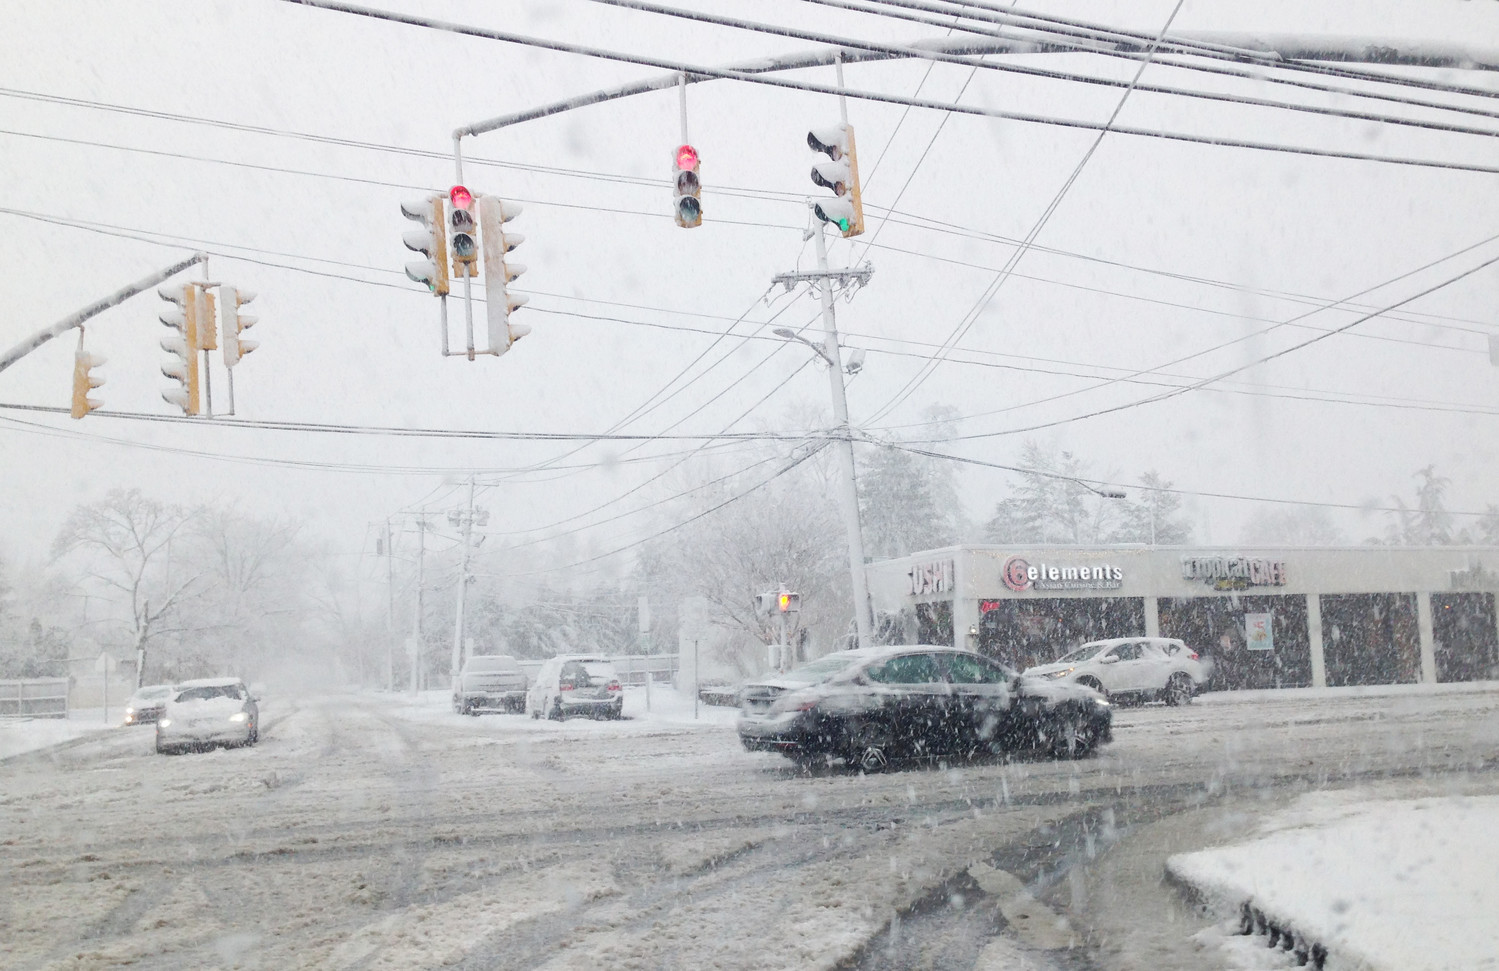 For the fourth time in March, the National Weather Service was predicting that a nor'easter would blow into the Long Island Region. This one was expected to hit Wednesday. Above, a view of Merrick Road in Merrick during the March 7 nor'easter, which dropped four to six inches of snow across Nassau County.